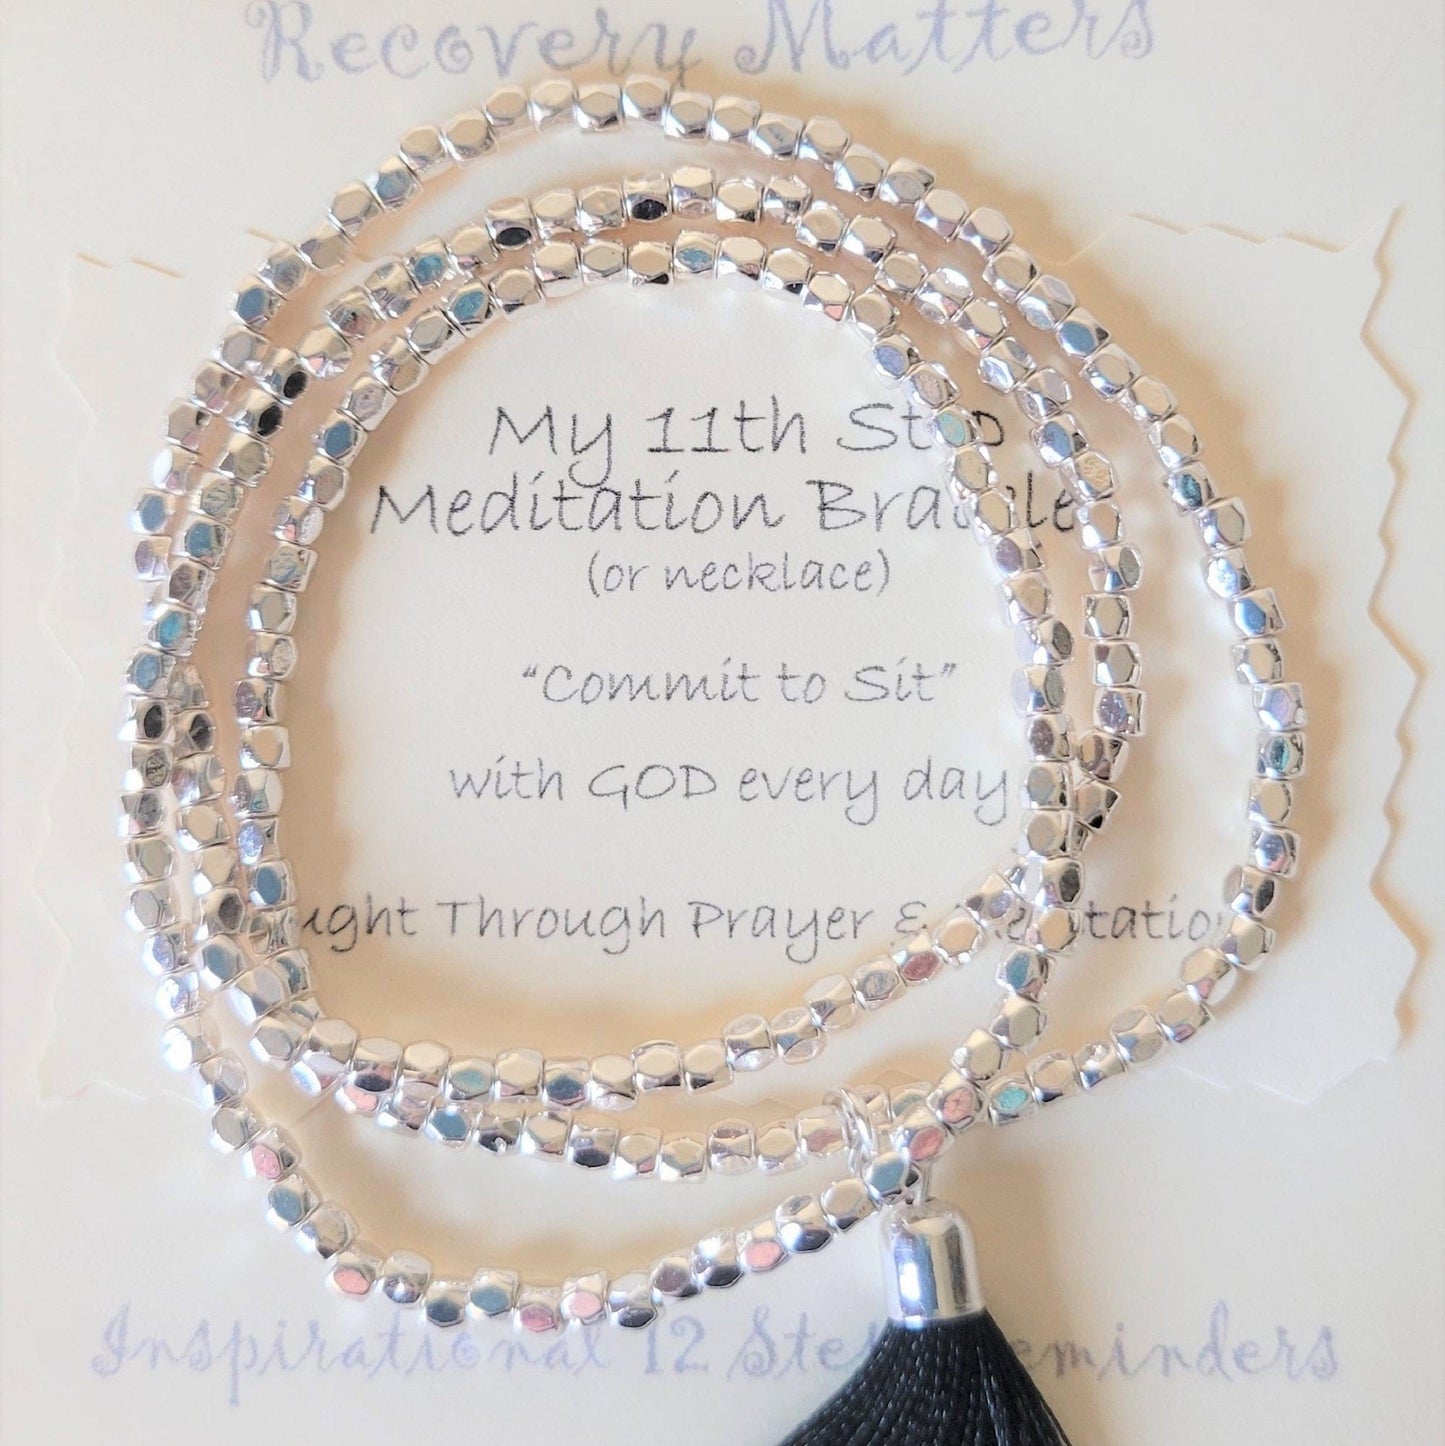 Meditation Bracelet (or Necklace) By Recovery Matters Rhodium (Silver) / Black